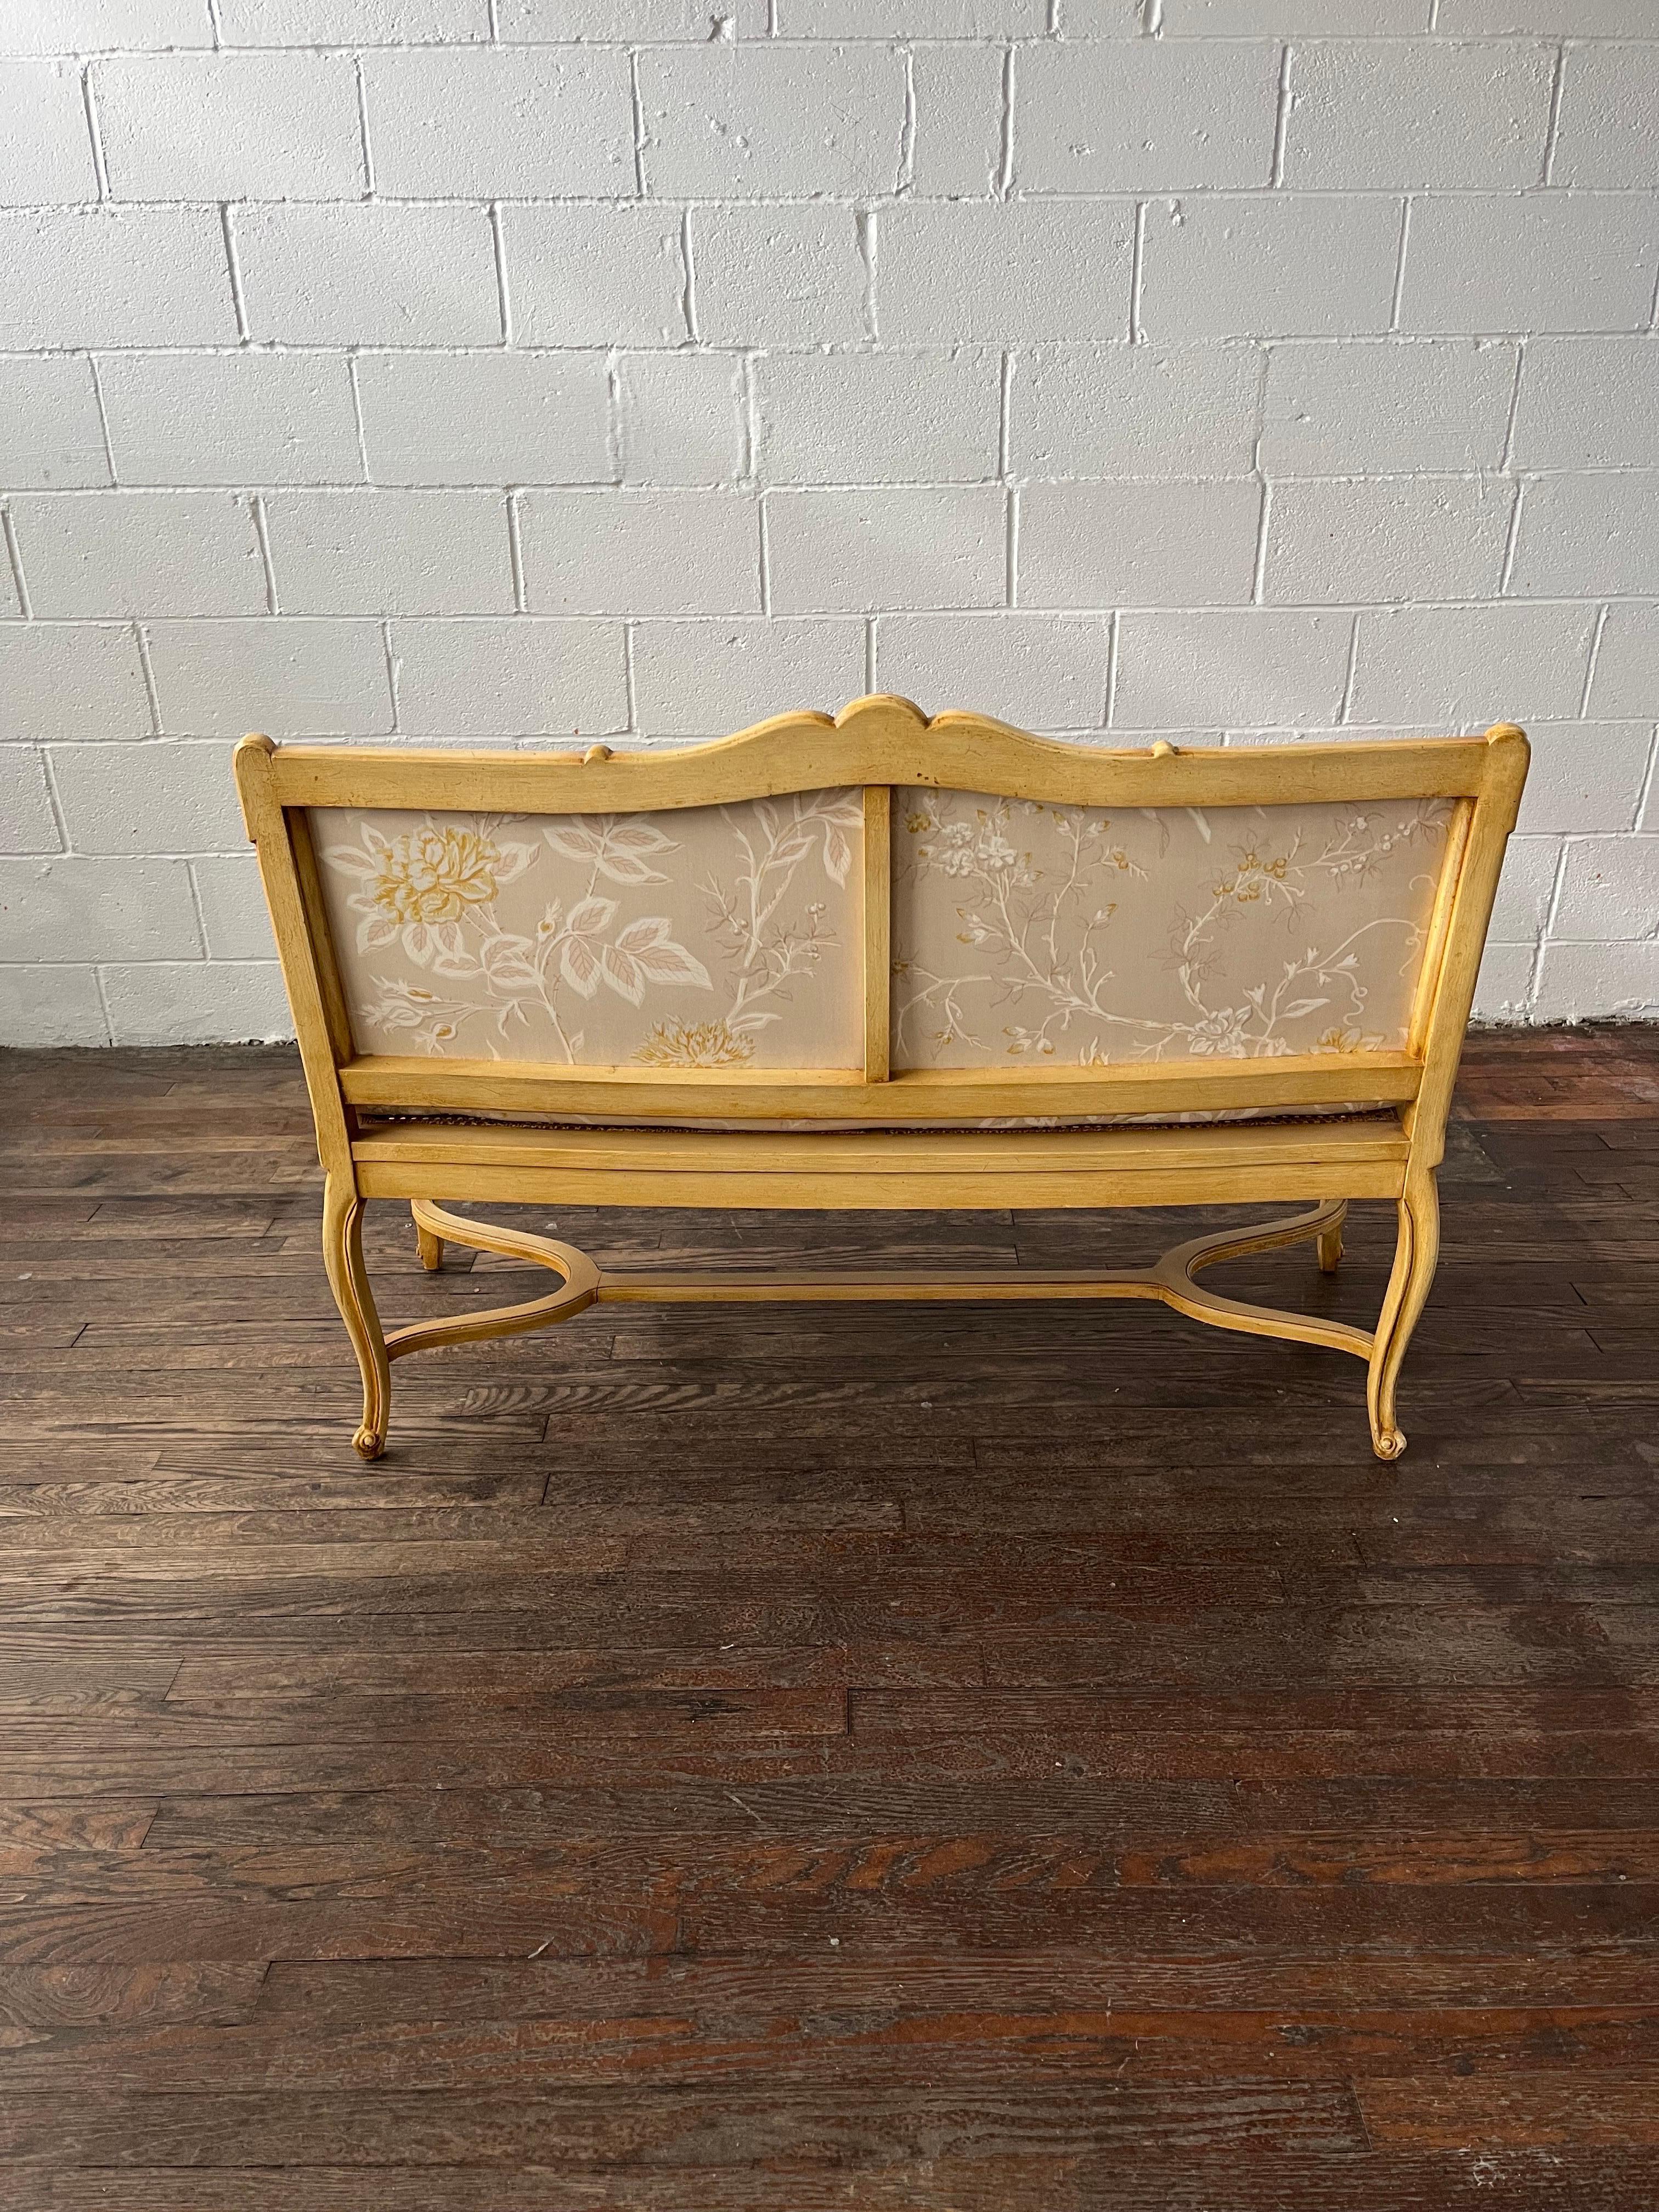 Vintage Provincial Cane Upholstered Settee In Good Condition For Sale In W Allenhurst, NJ